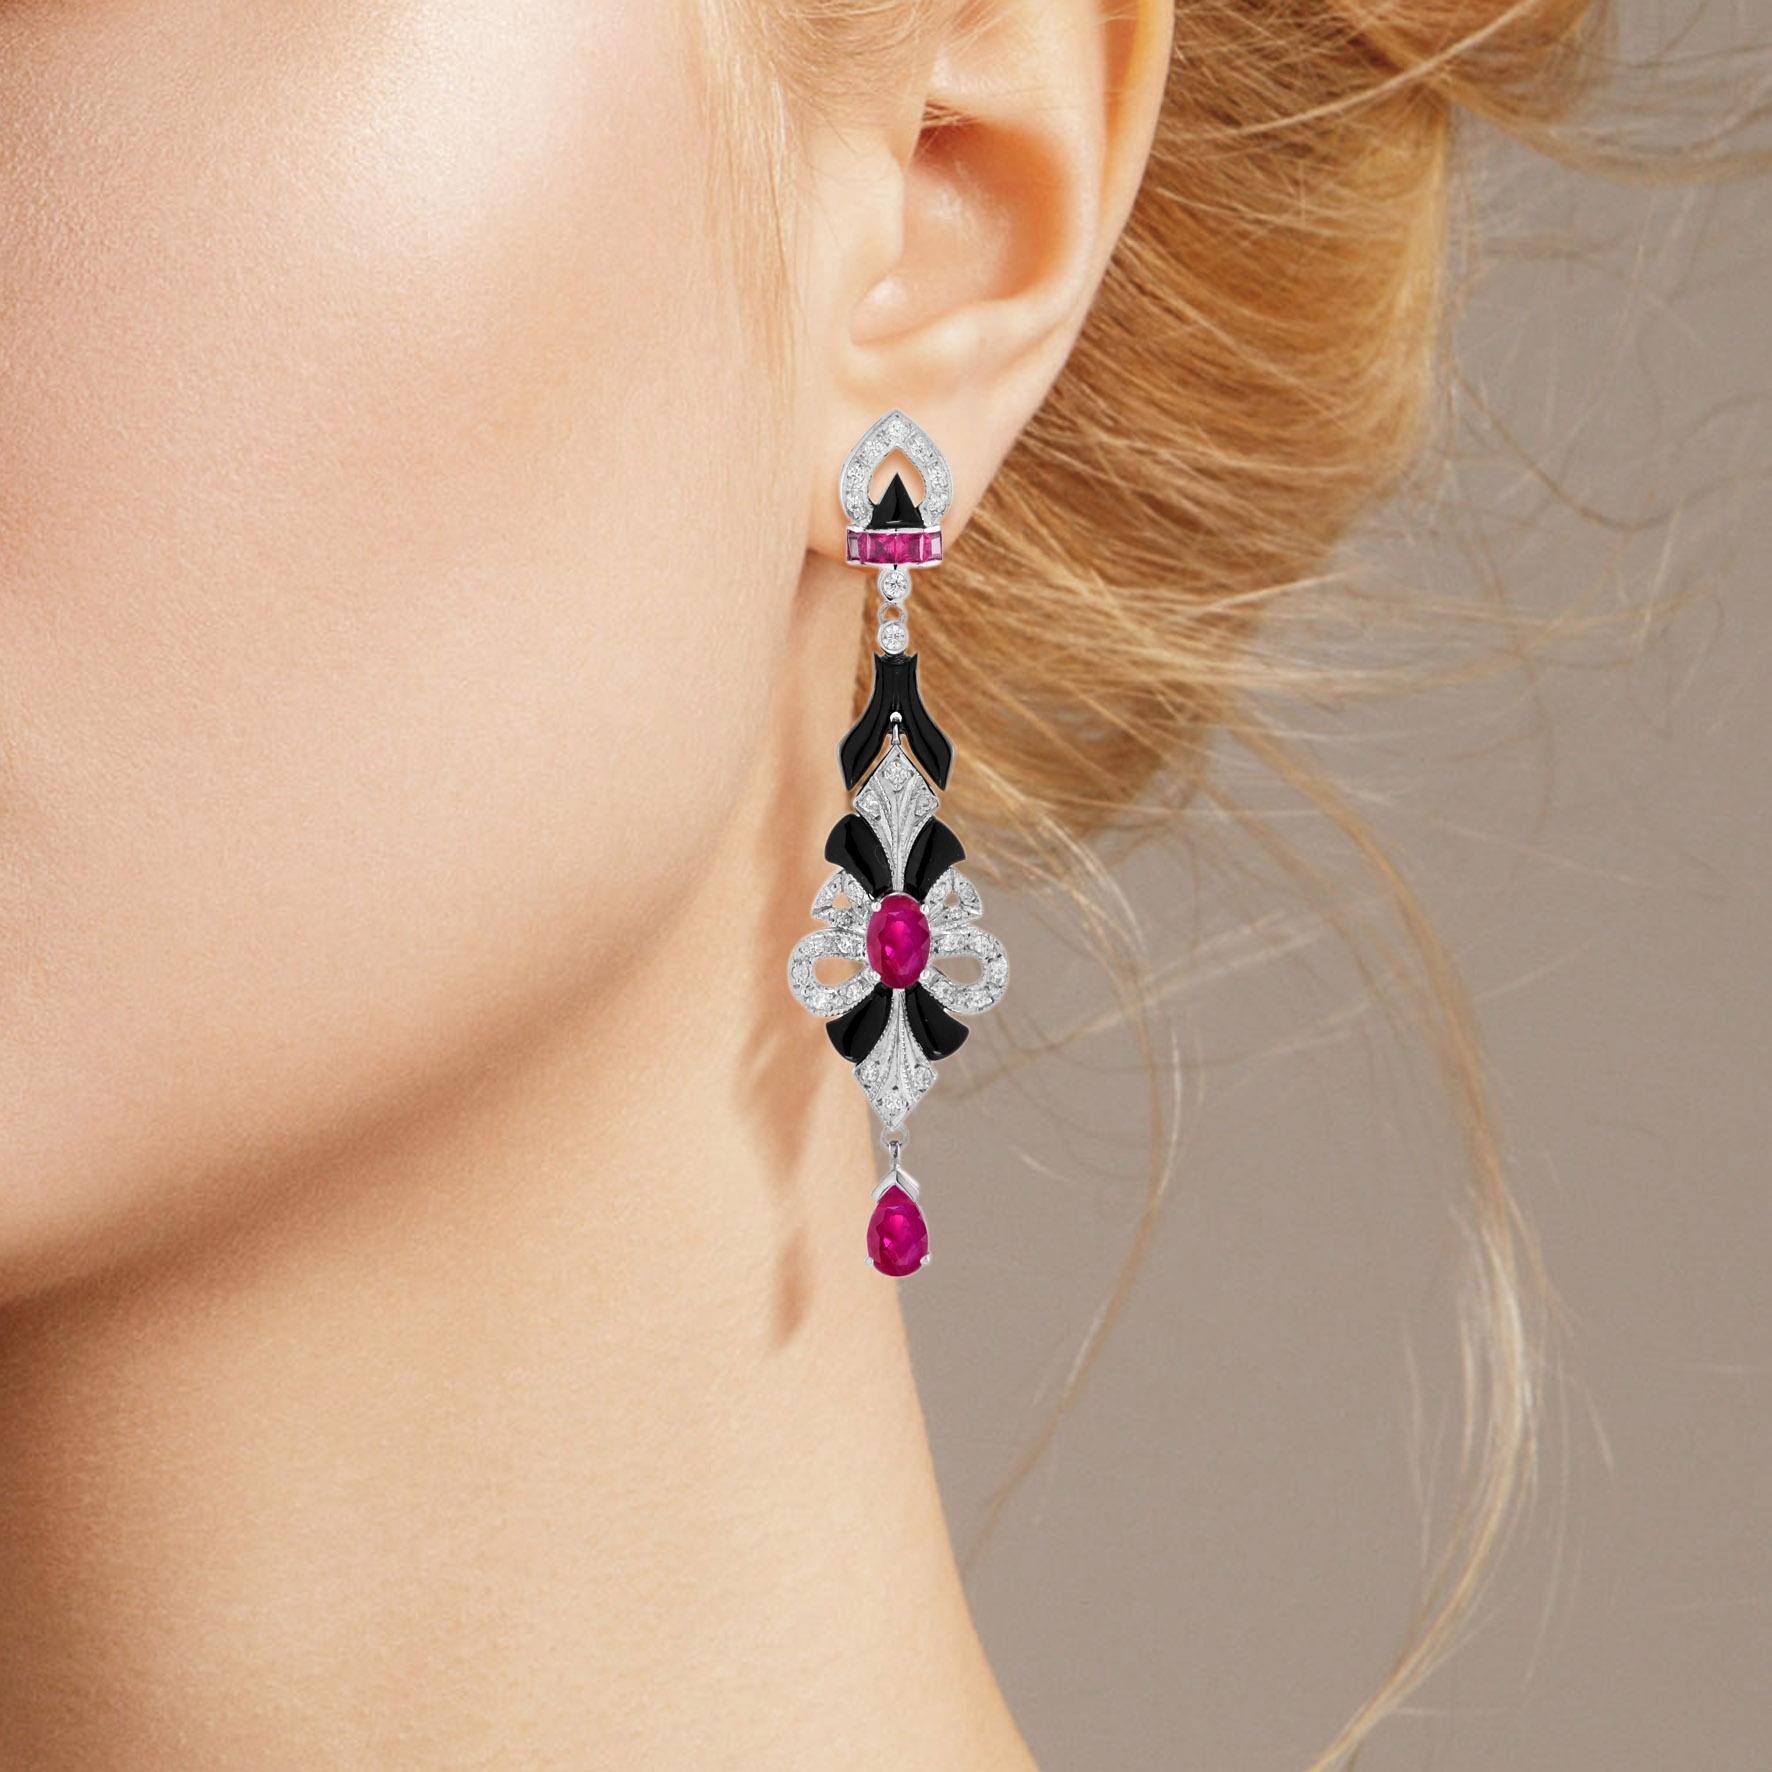 A dramatic and unusual pair of antique design eardrops anchored by a ruby centered, ruby drop, with black onyx and diamond accent. This charming piece is a winsome adornment perfect to mark a milestone occasion. 

Earrings Information
Style: Art